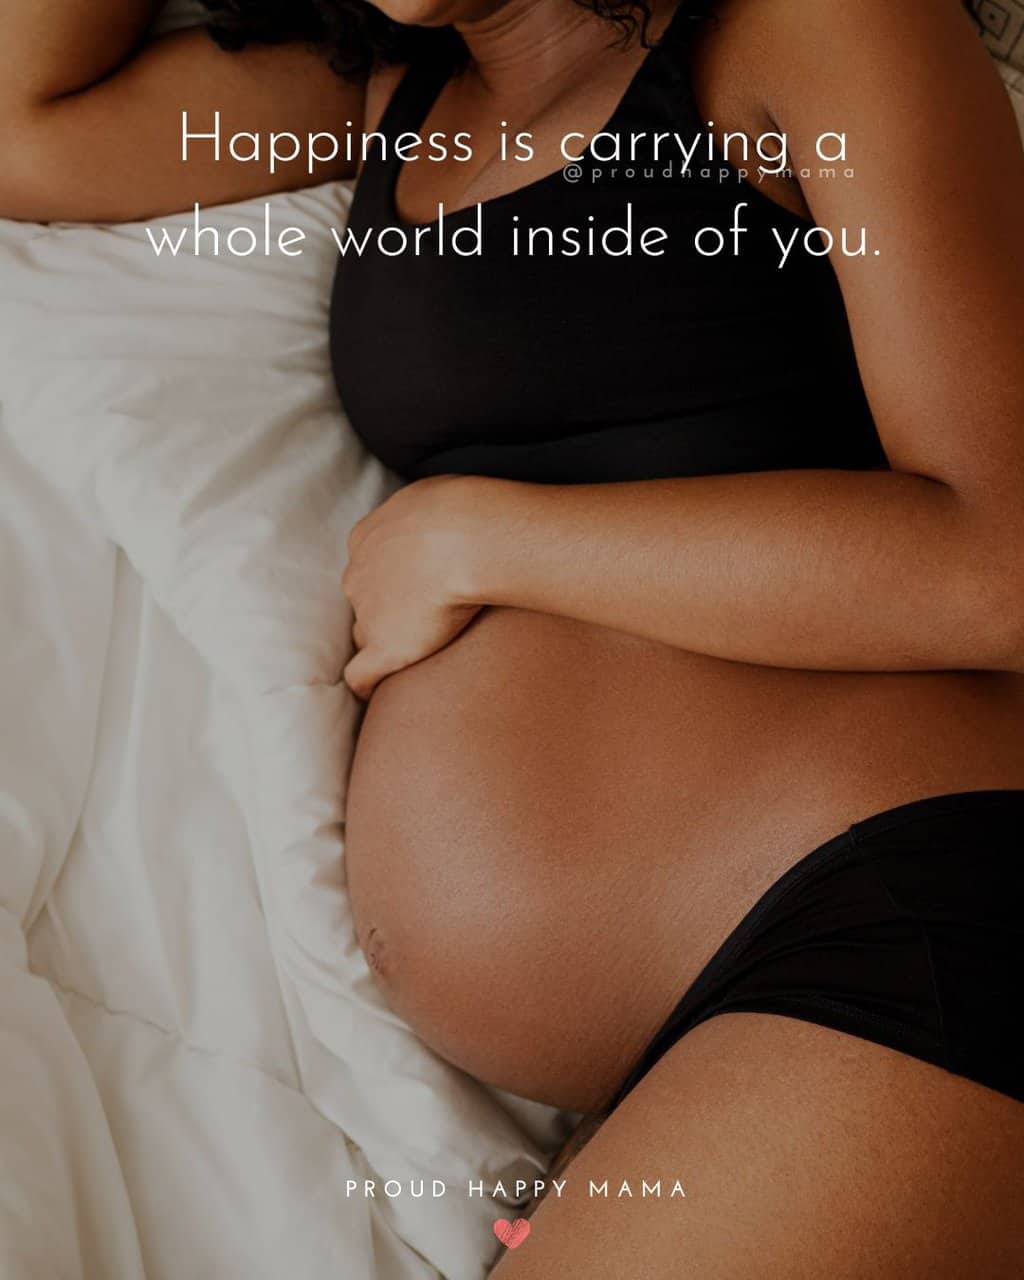 Pregnancy Quotes For Baby Boy | Happiness is carrying a whole world inside of you.